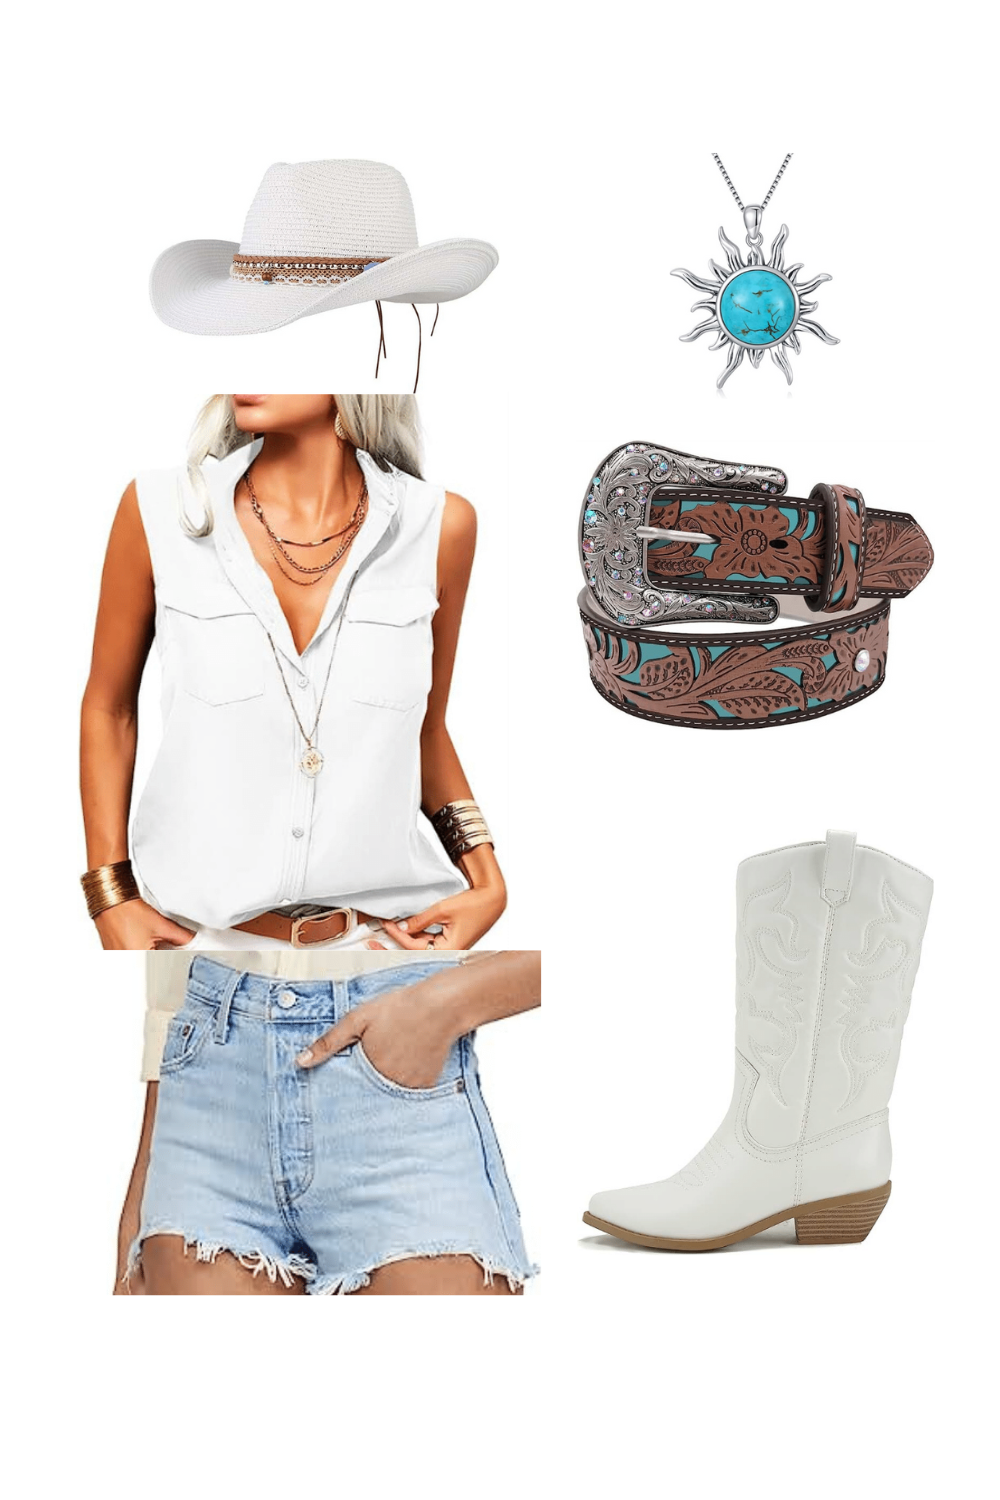 Get Ready to Embrace the Coastal Cowgirl